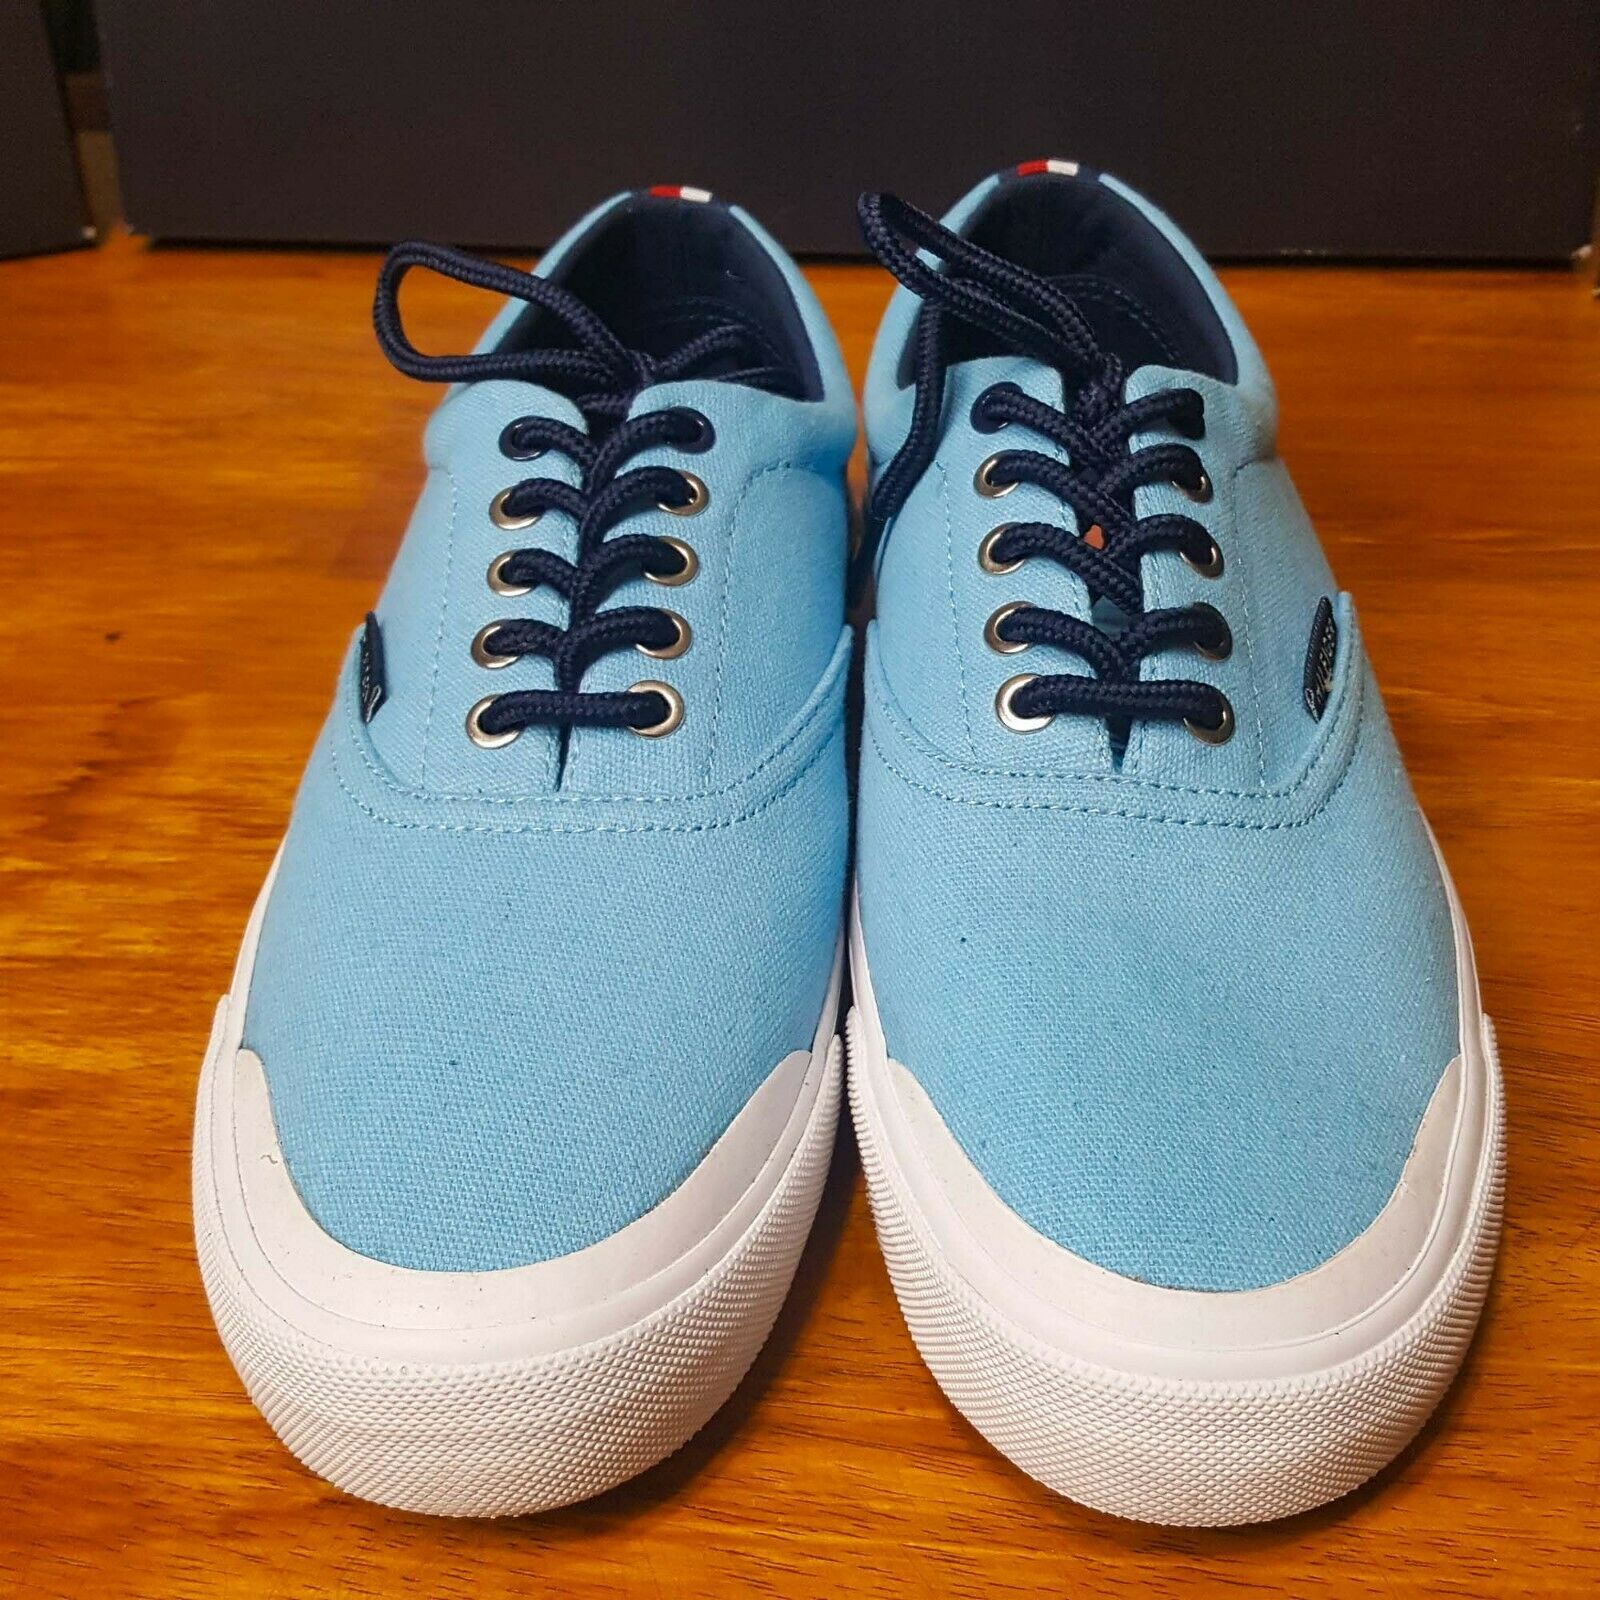 Tommy Hilfiger TH Pallet Light Blue Casual Canvas Sneaker Boat Deck ...